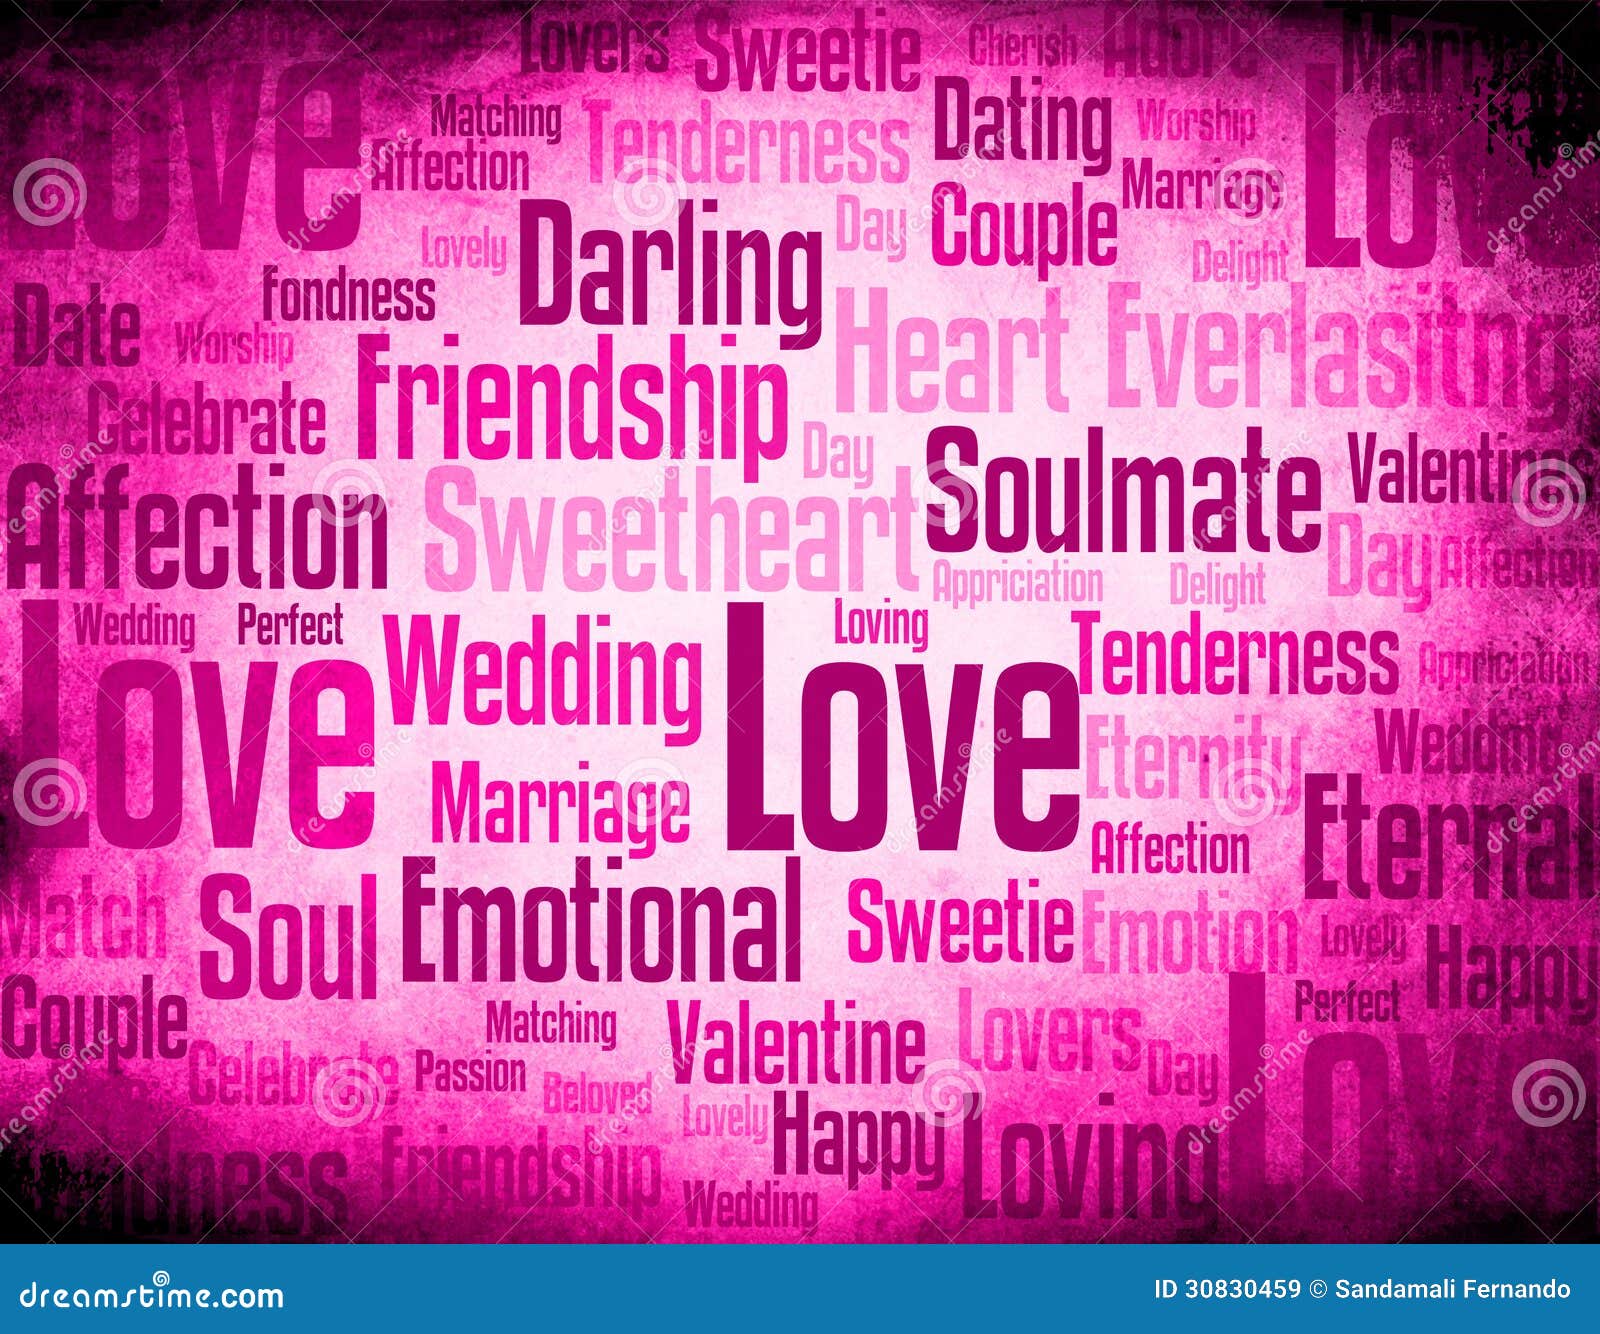 Love word cloud stock illustration. Image of marriage - 30830459